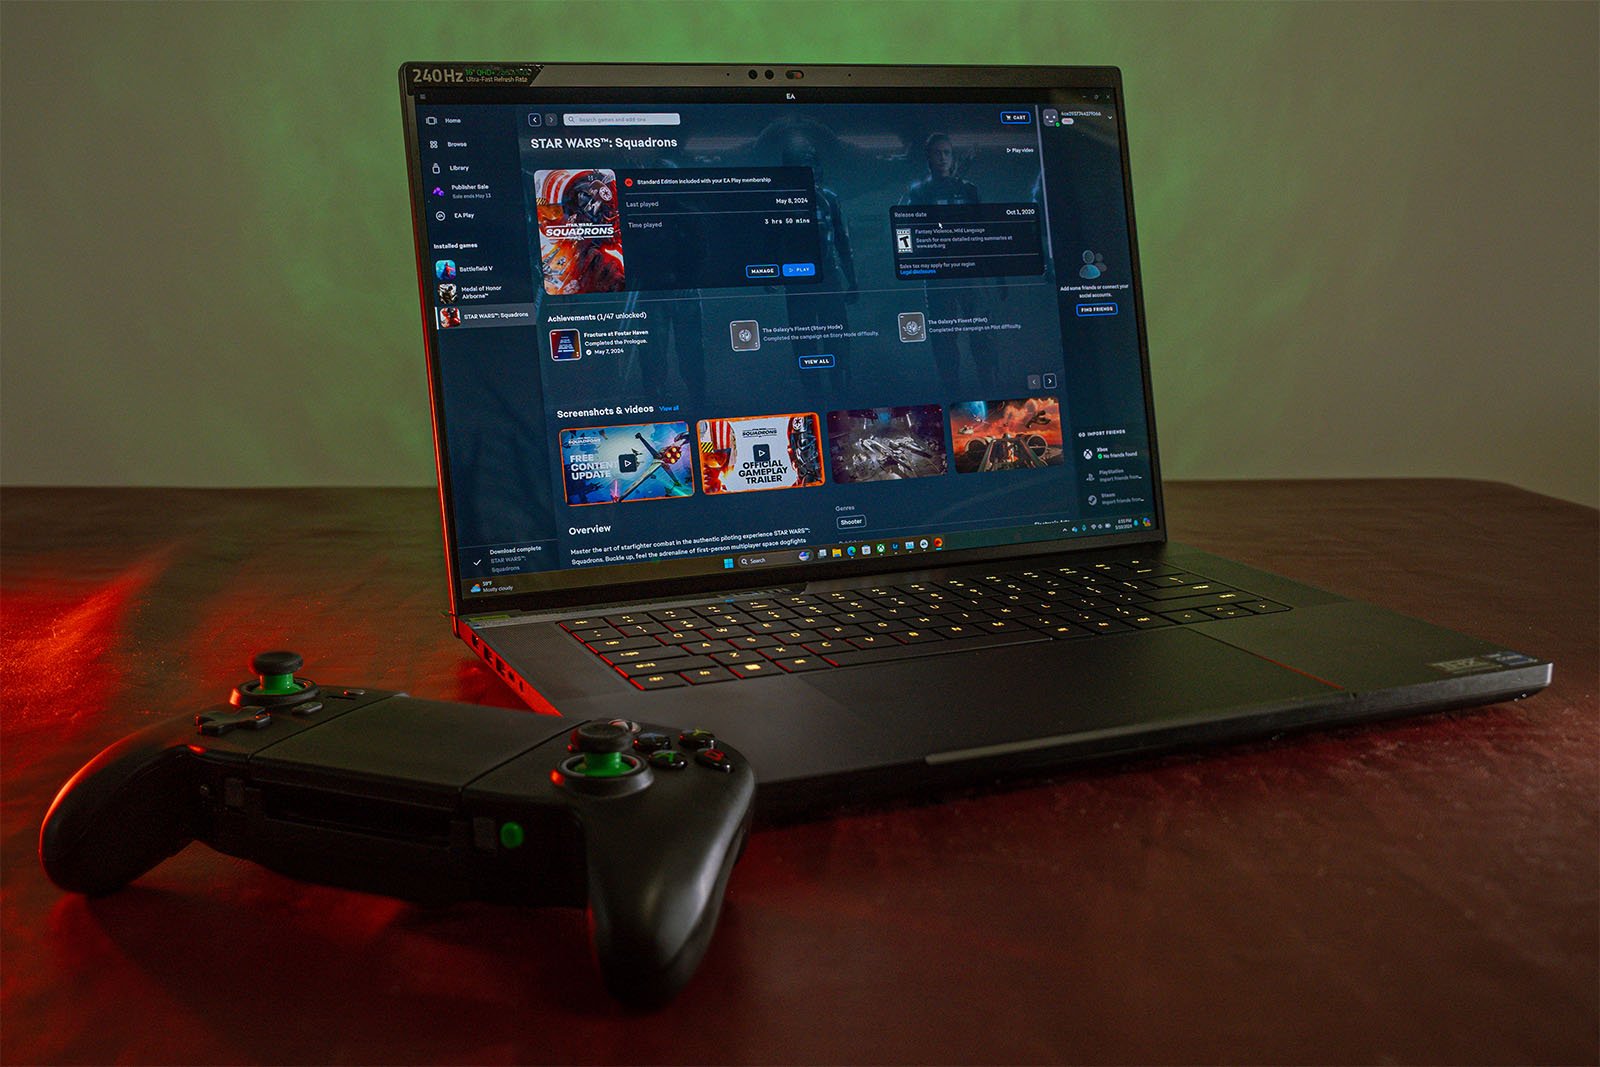 A gaming laptop with its screen displaying a game library is placed on a red surface. Next to the laptop is a wireless gaming controller. The background features a subtle gradient of green light.